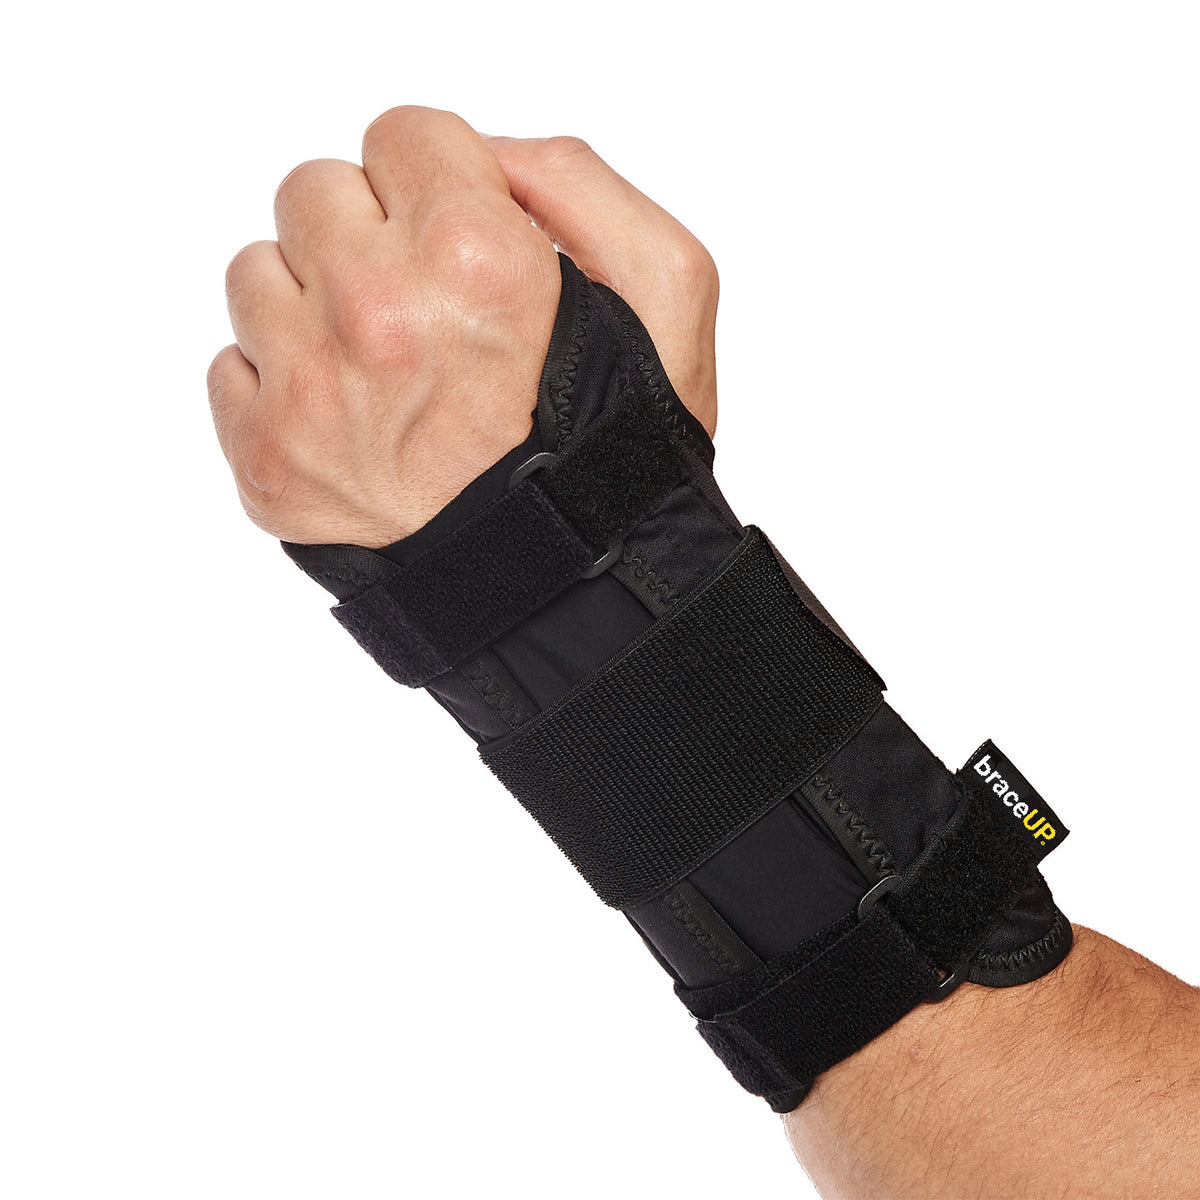 Estink Wrist Support Brace, Carpal Tunnel Splint Brace Protection with  Adjustable Hook Loop and Splint Support for Carpal Tunnel Syndrome  Tendonitis